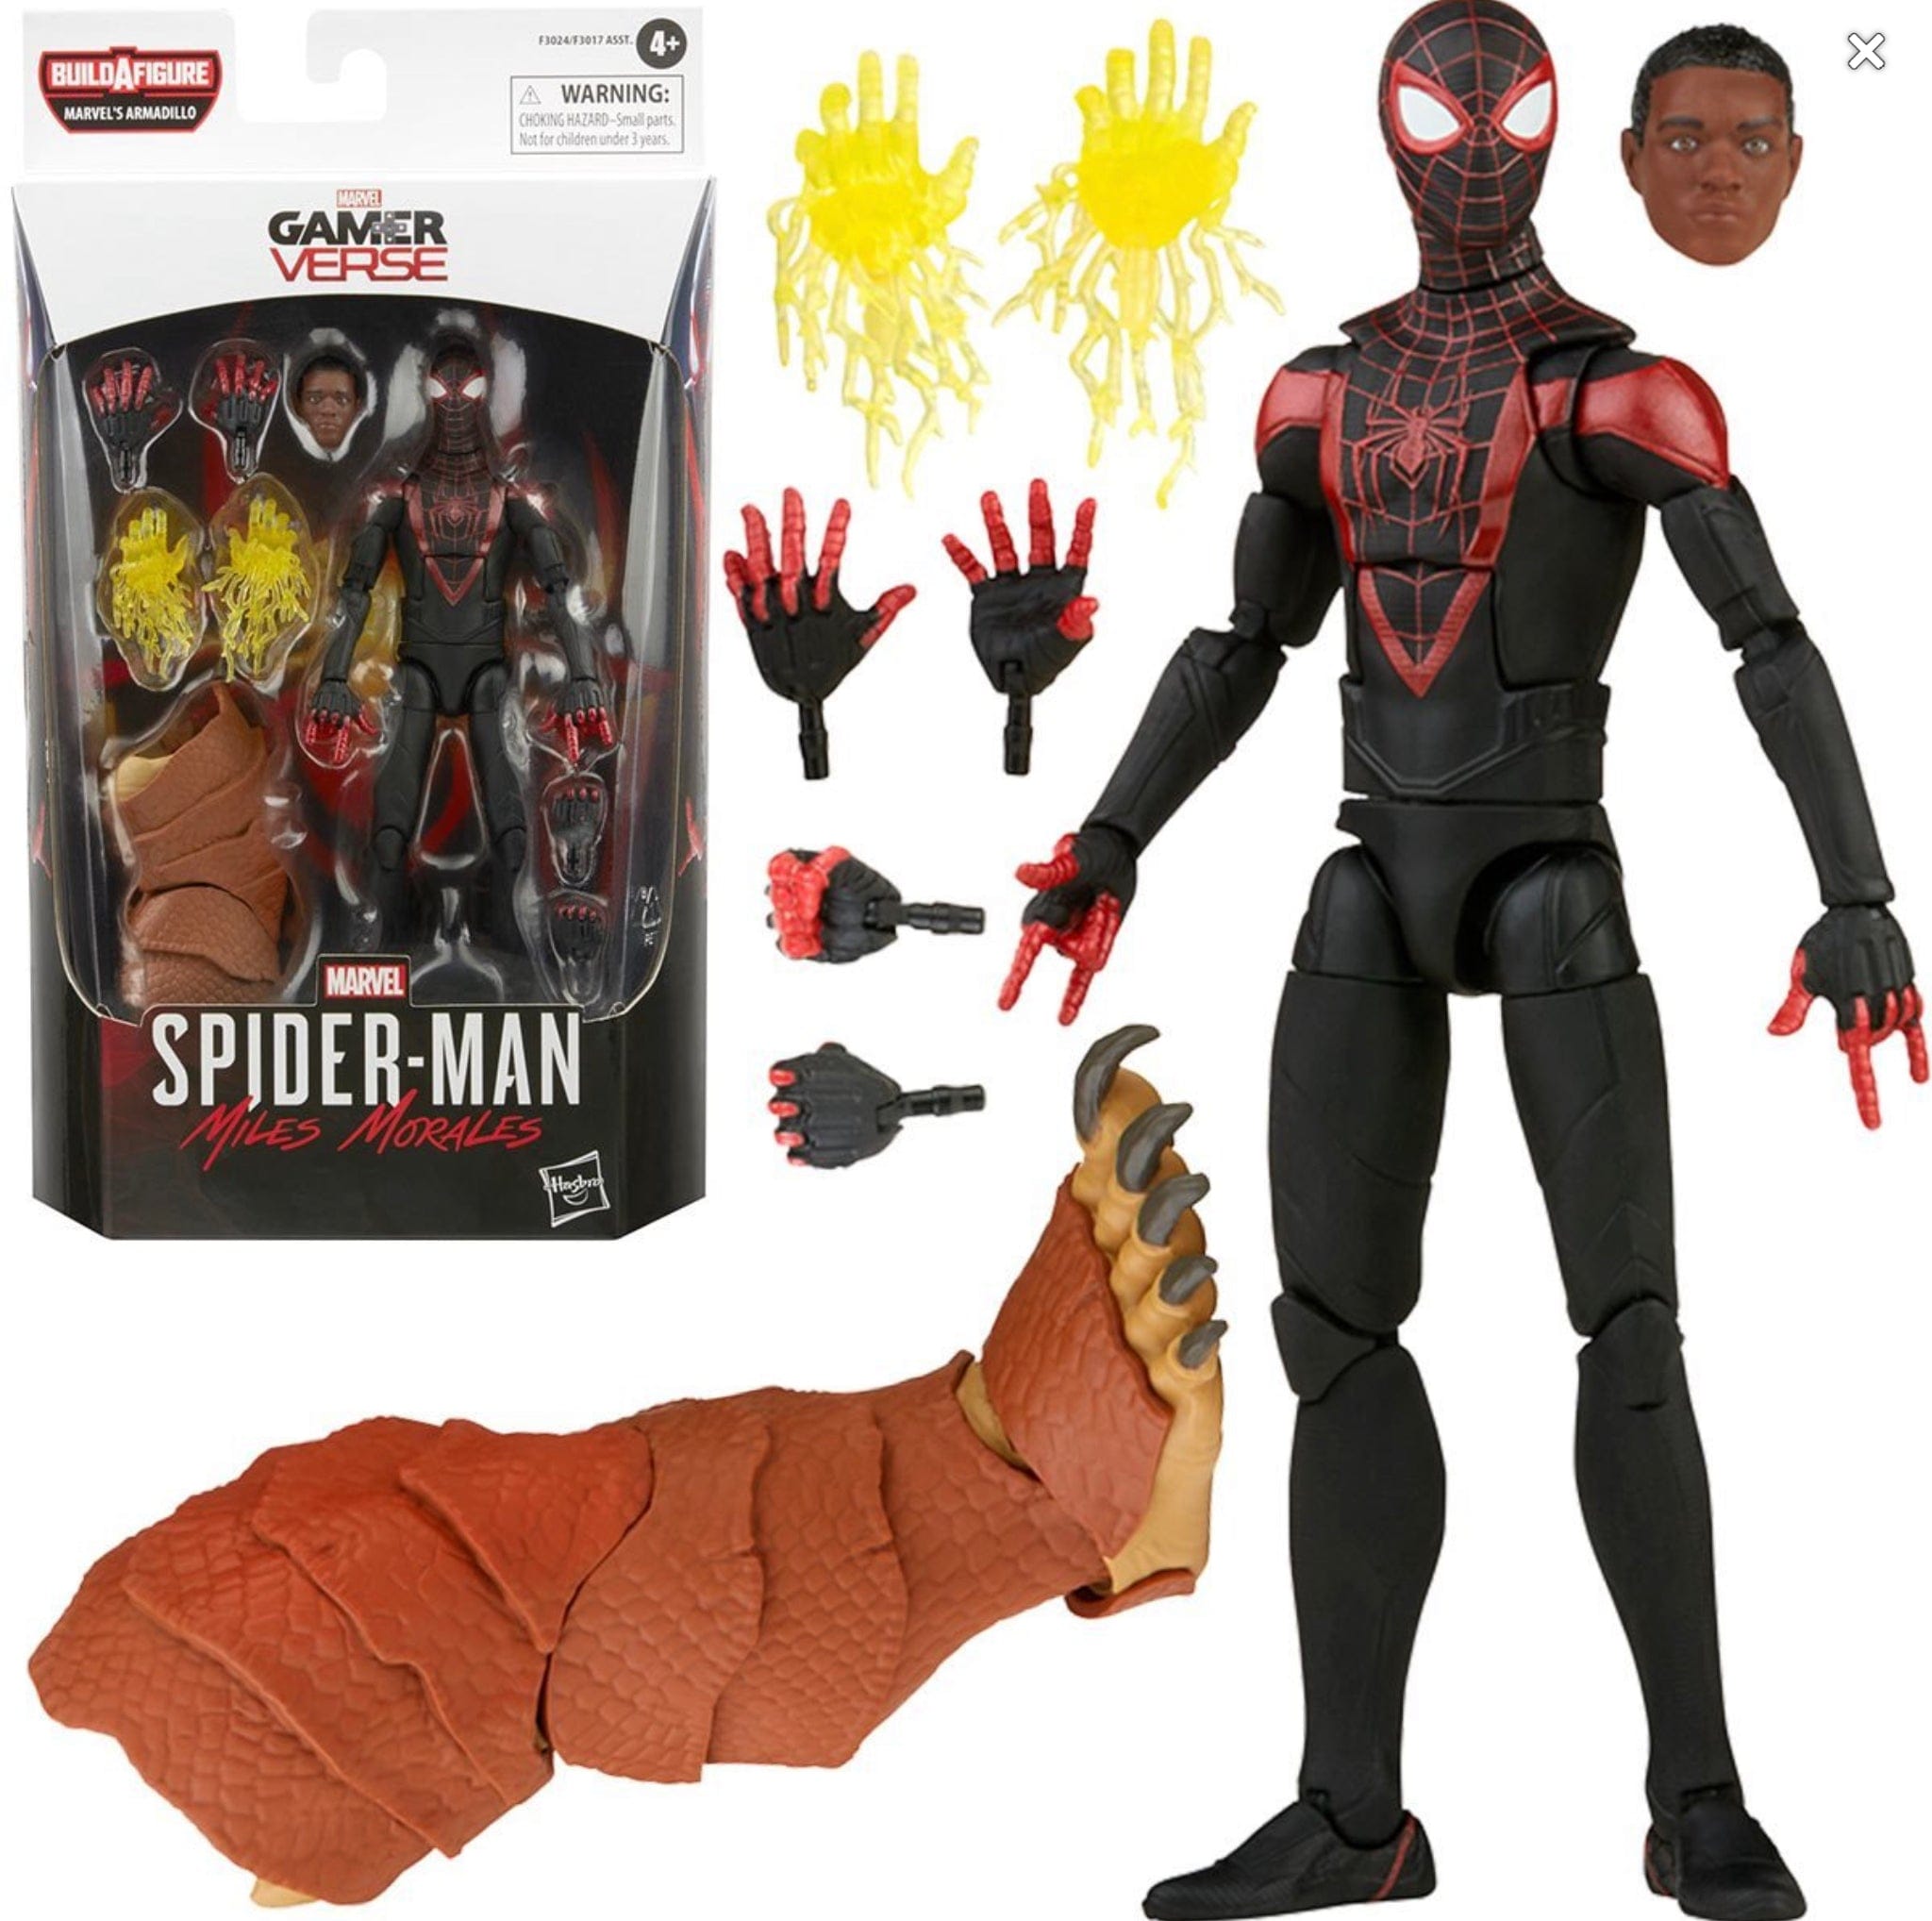 Spider-Man 3 Marvel Legends Miles Morales 6-Inch Action Figure packaging and figure